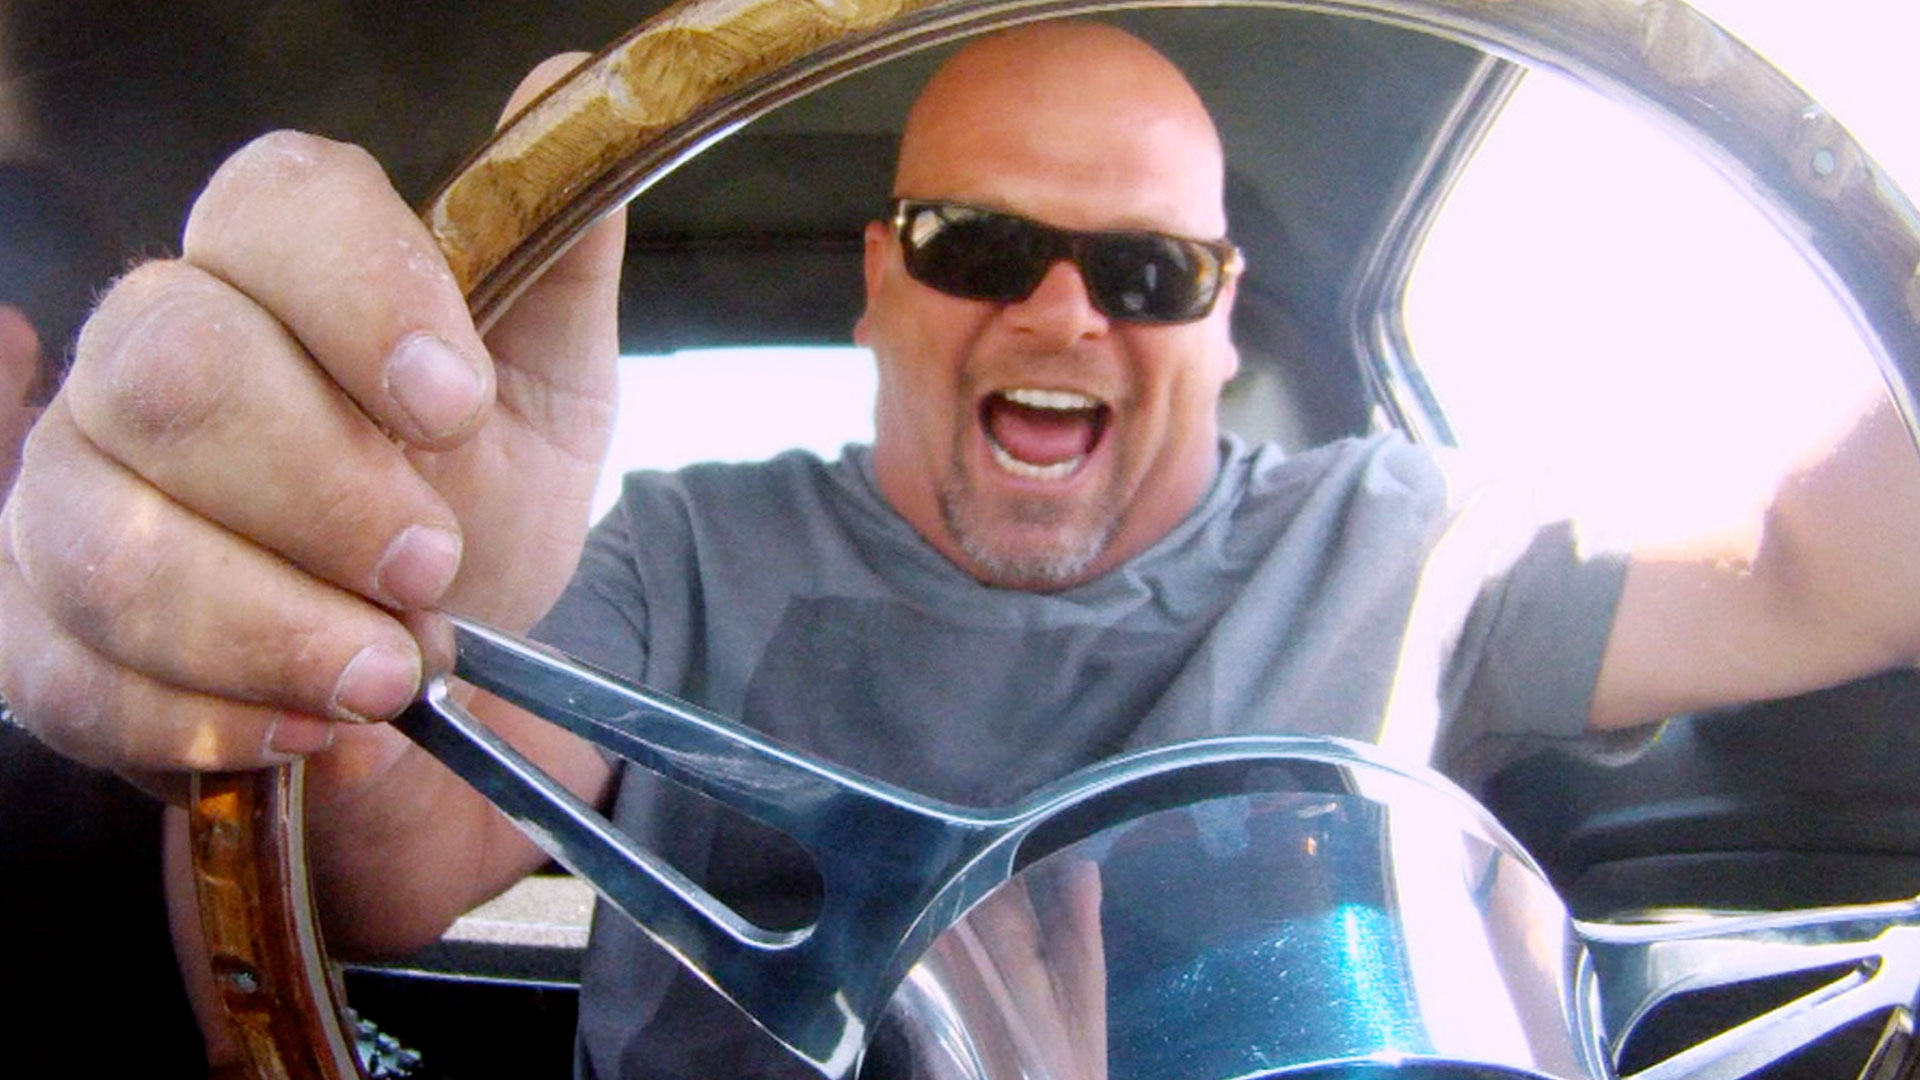 Counting Cars: "Cool Cars for Cool Cats" Playlist: Watch Without Signing In